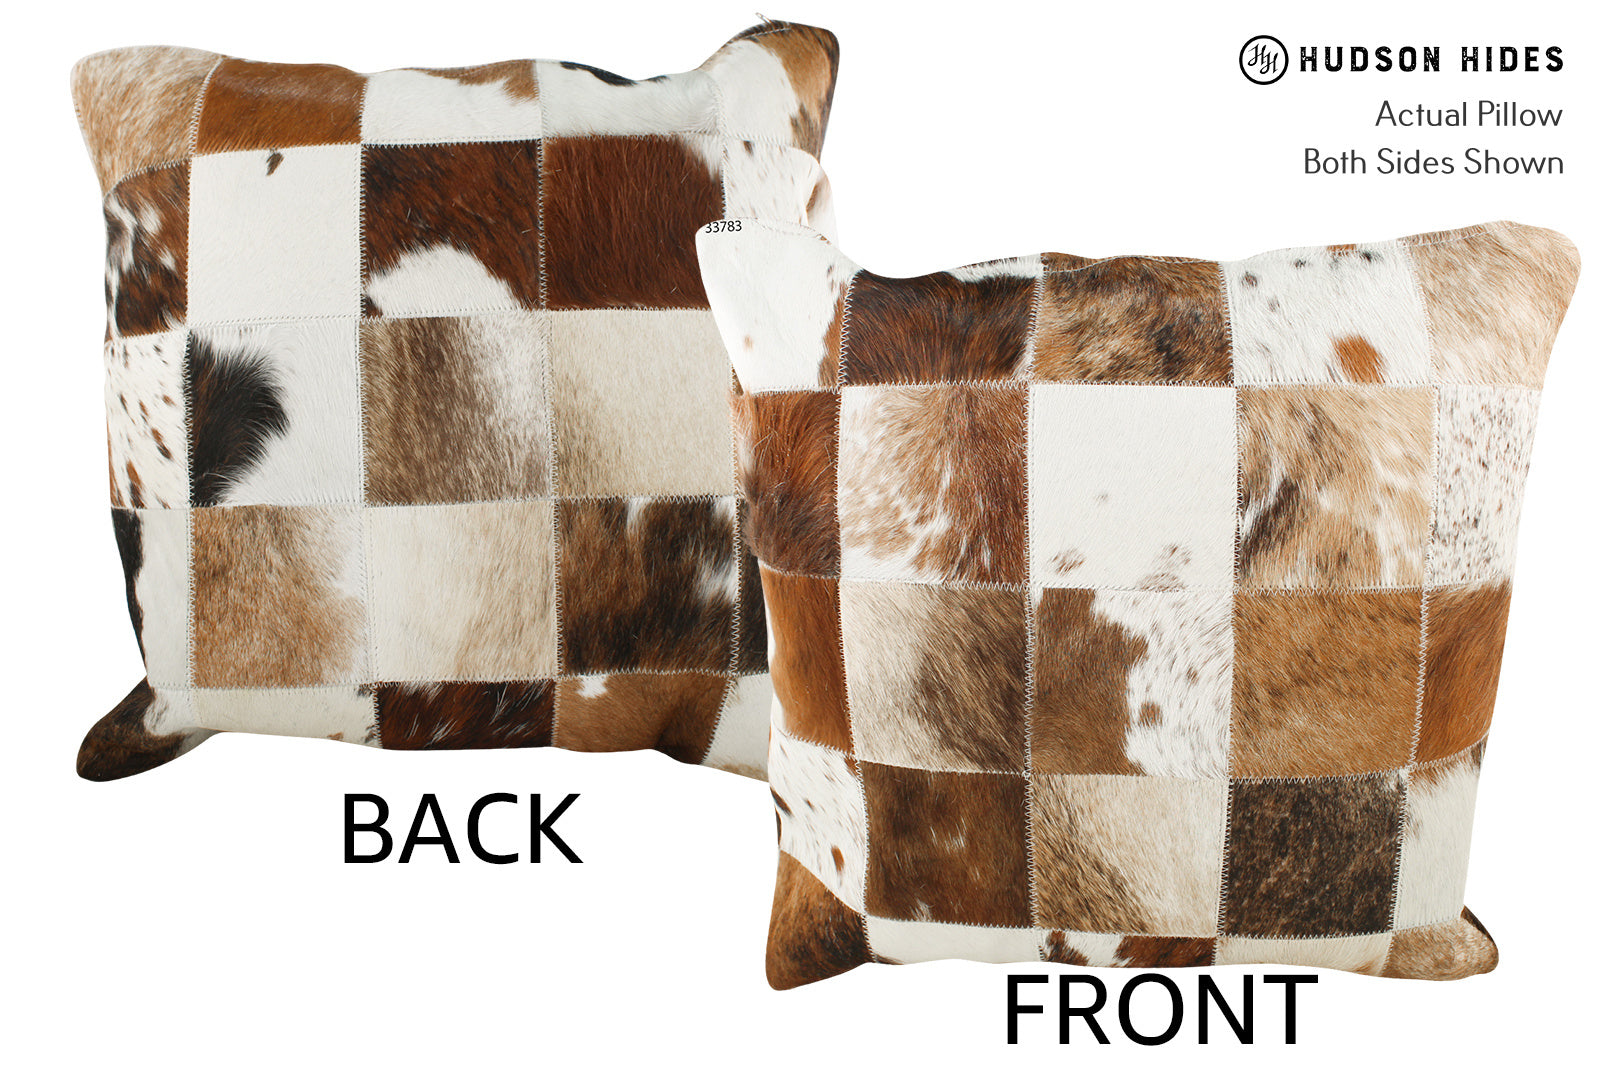 Patchwork Cowhide Pillow #33783